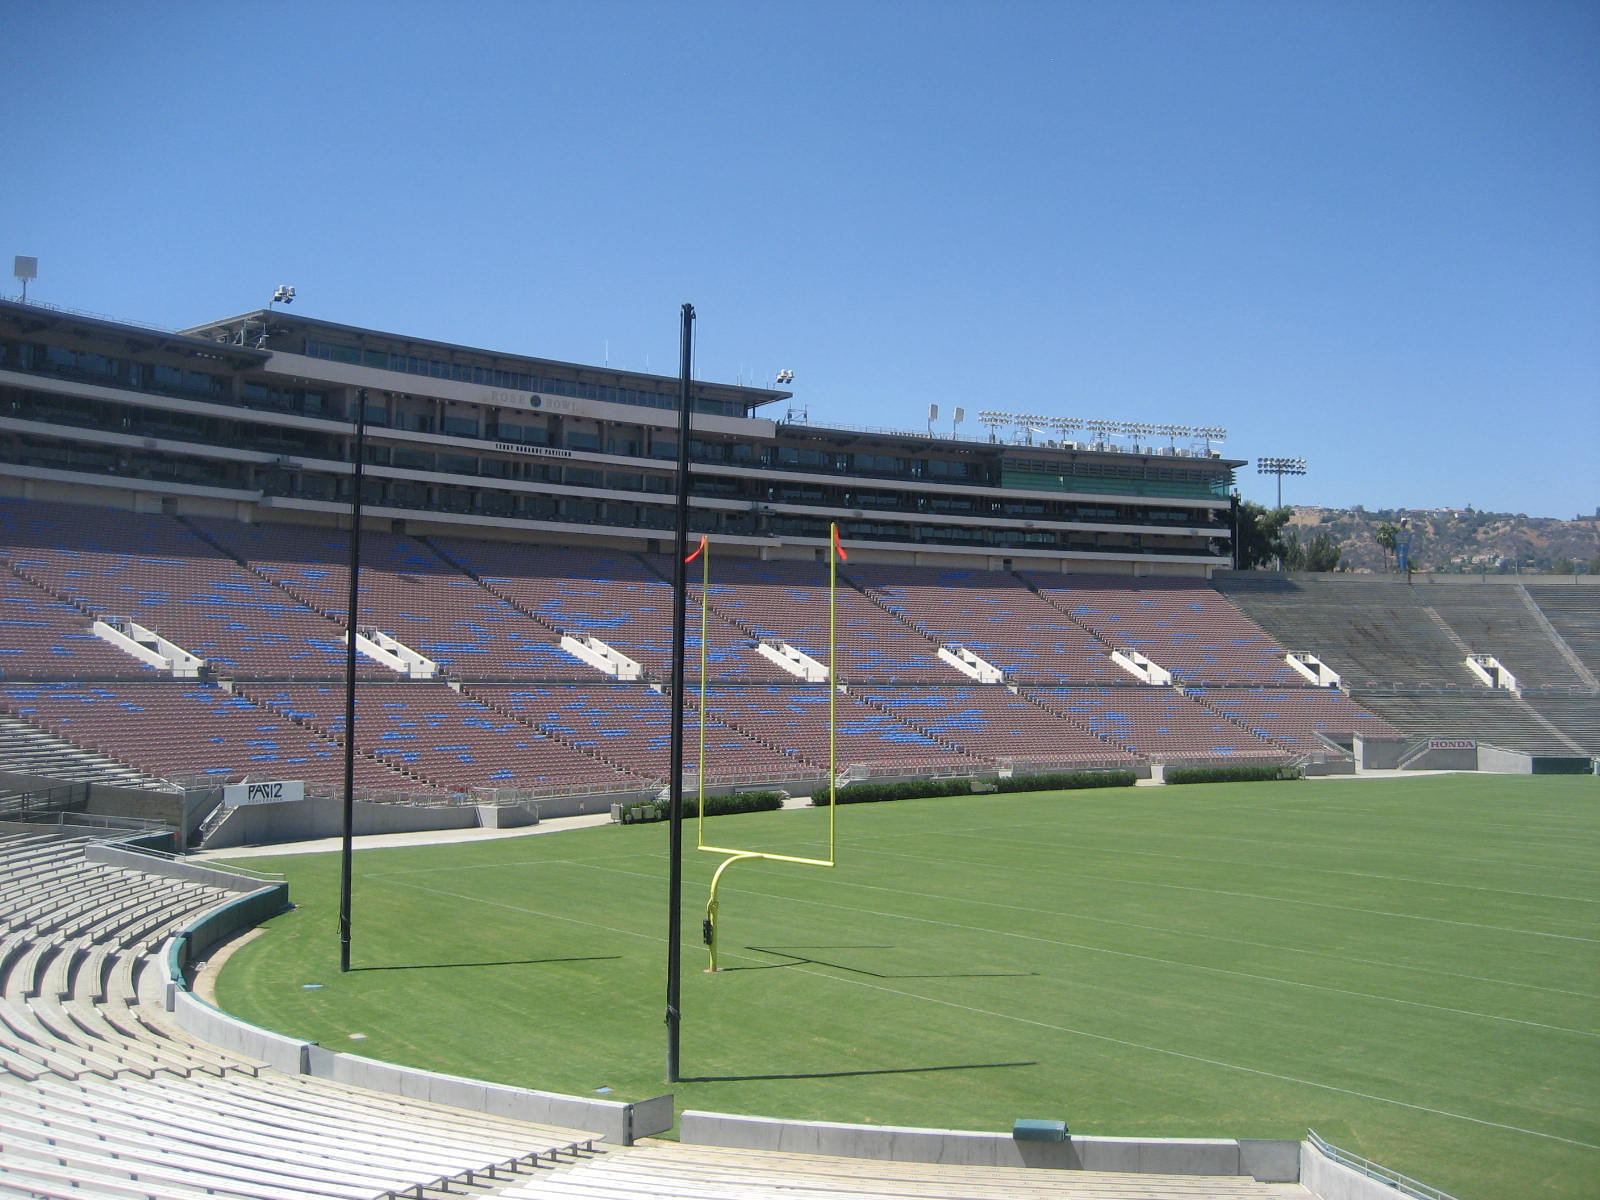 west stands at rose bowl